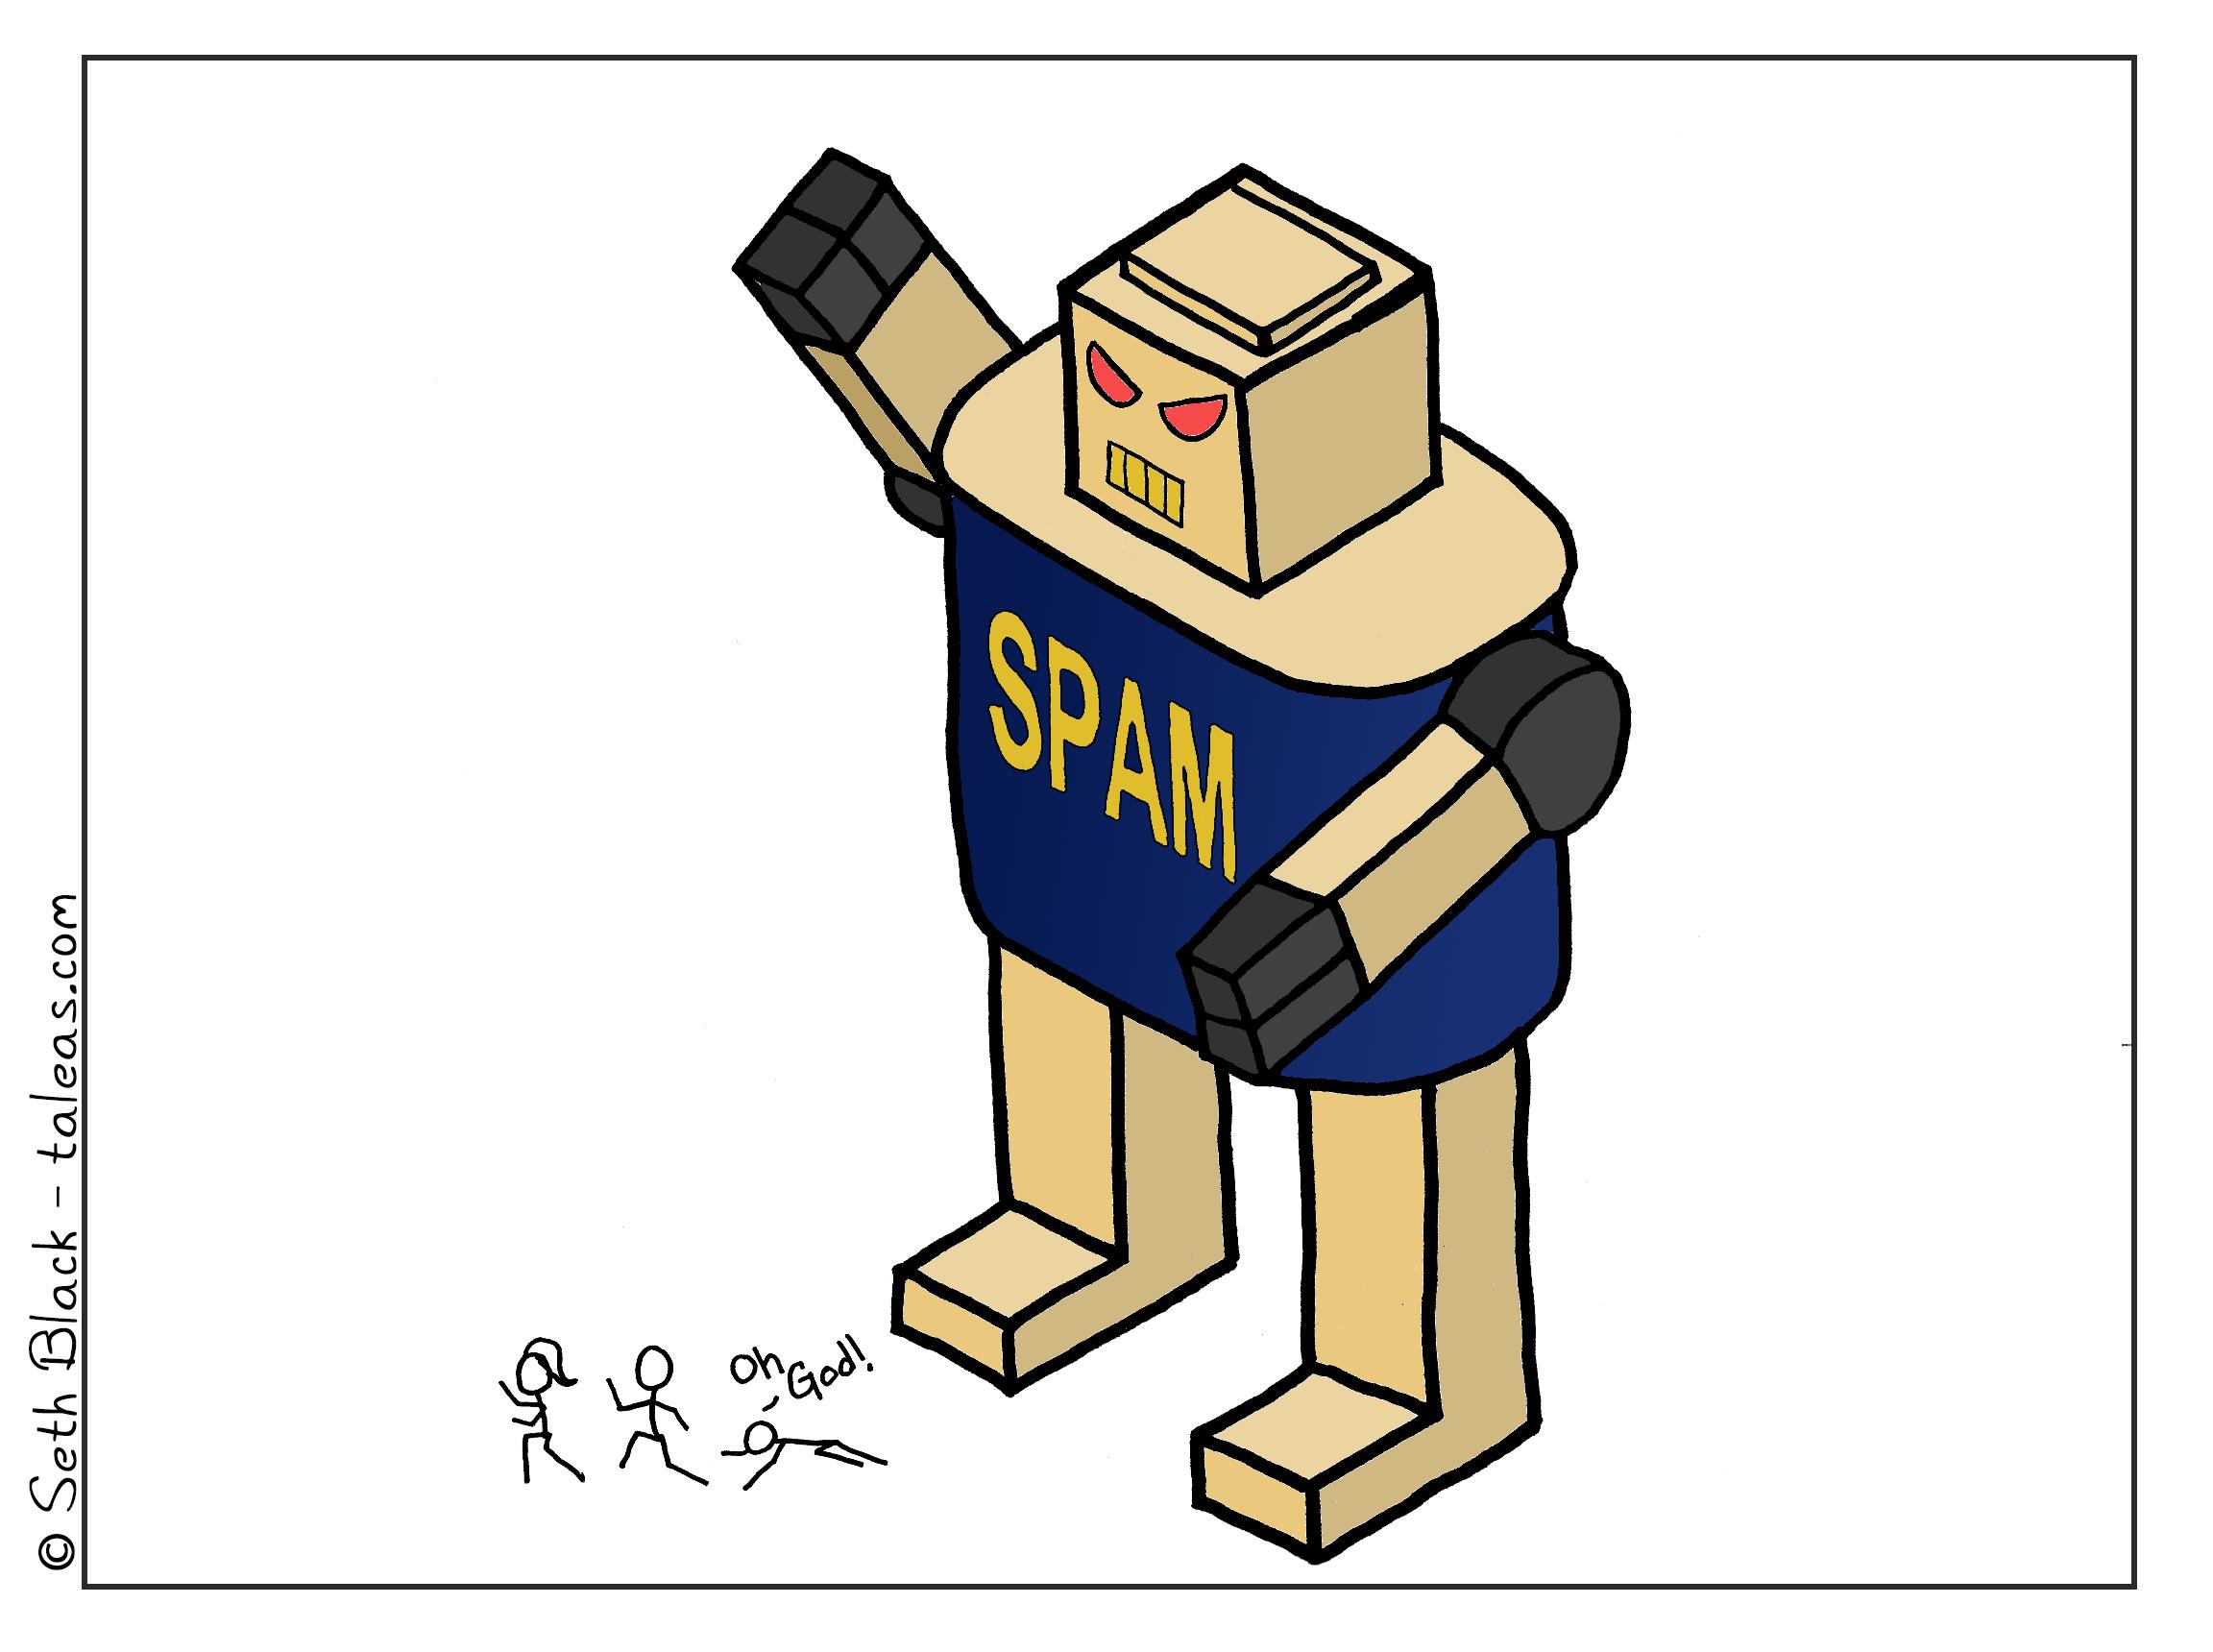 A giant robot with the general shape and color scheme of a can of Spam is chasing a group of three stick figures. One stick figure has apparently fallen and is exclaiming, "Oh God!".